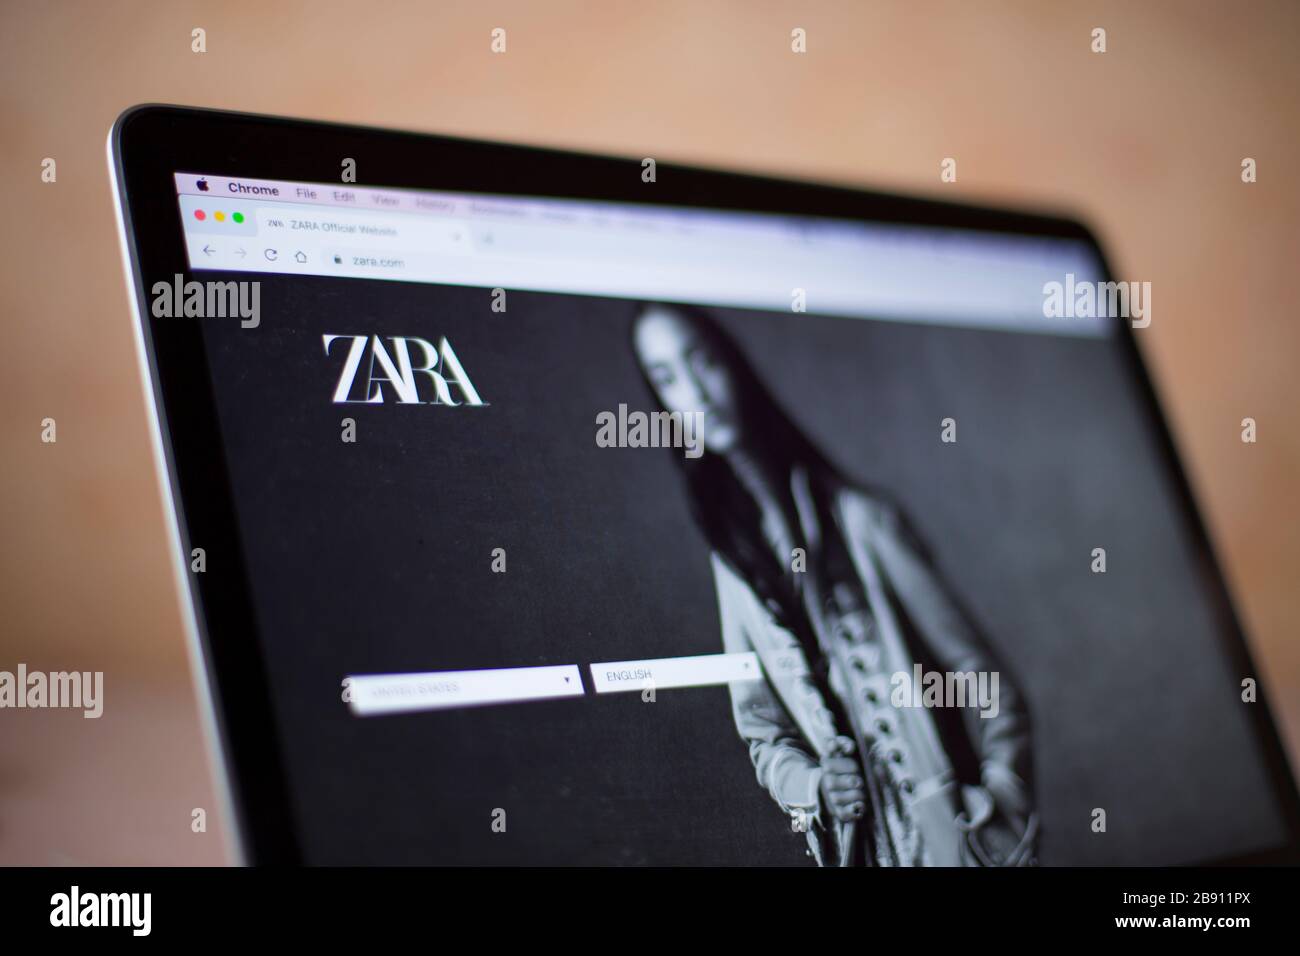 BELGRADE, SERBIA - MARCH 9, 2020: Zara company web site on computer screen  in Belgrade, Serbia. Zara is a company dedicated to the manufacturing of ho  Stock Photo - Alamy